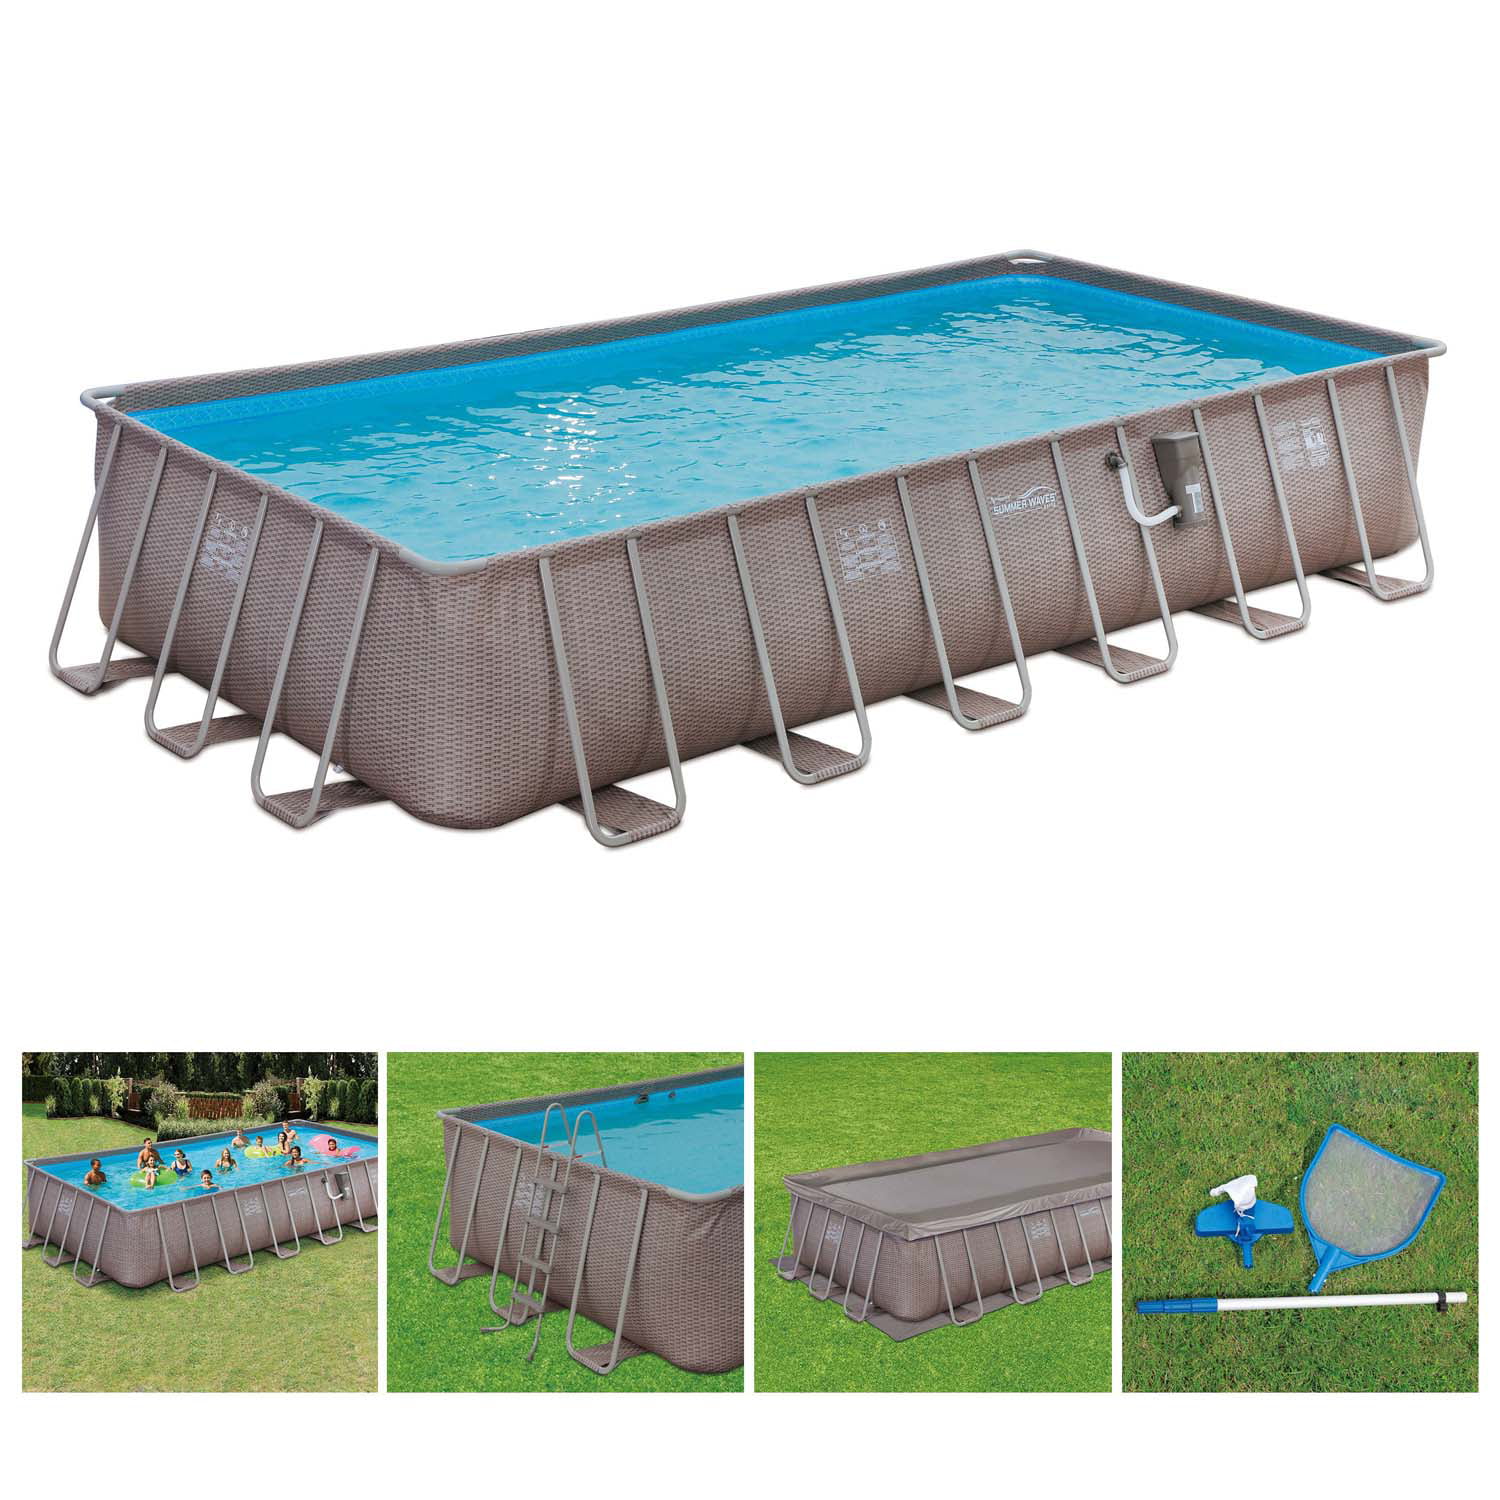 Creatice Summer Waves 24 X52 Metal Frame Above Ground Swimming Pool for Small Space